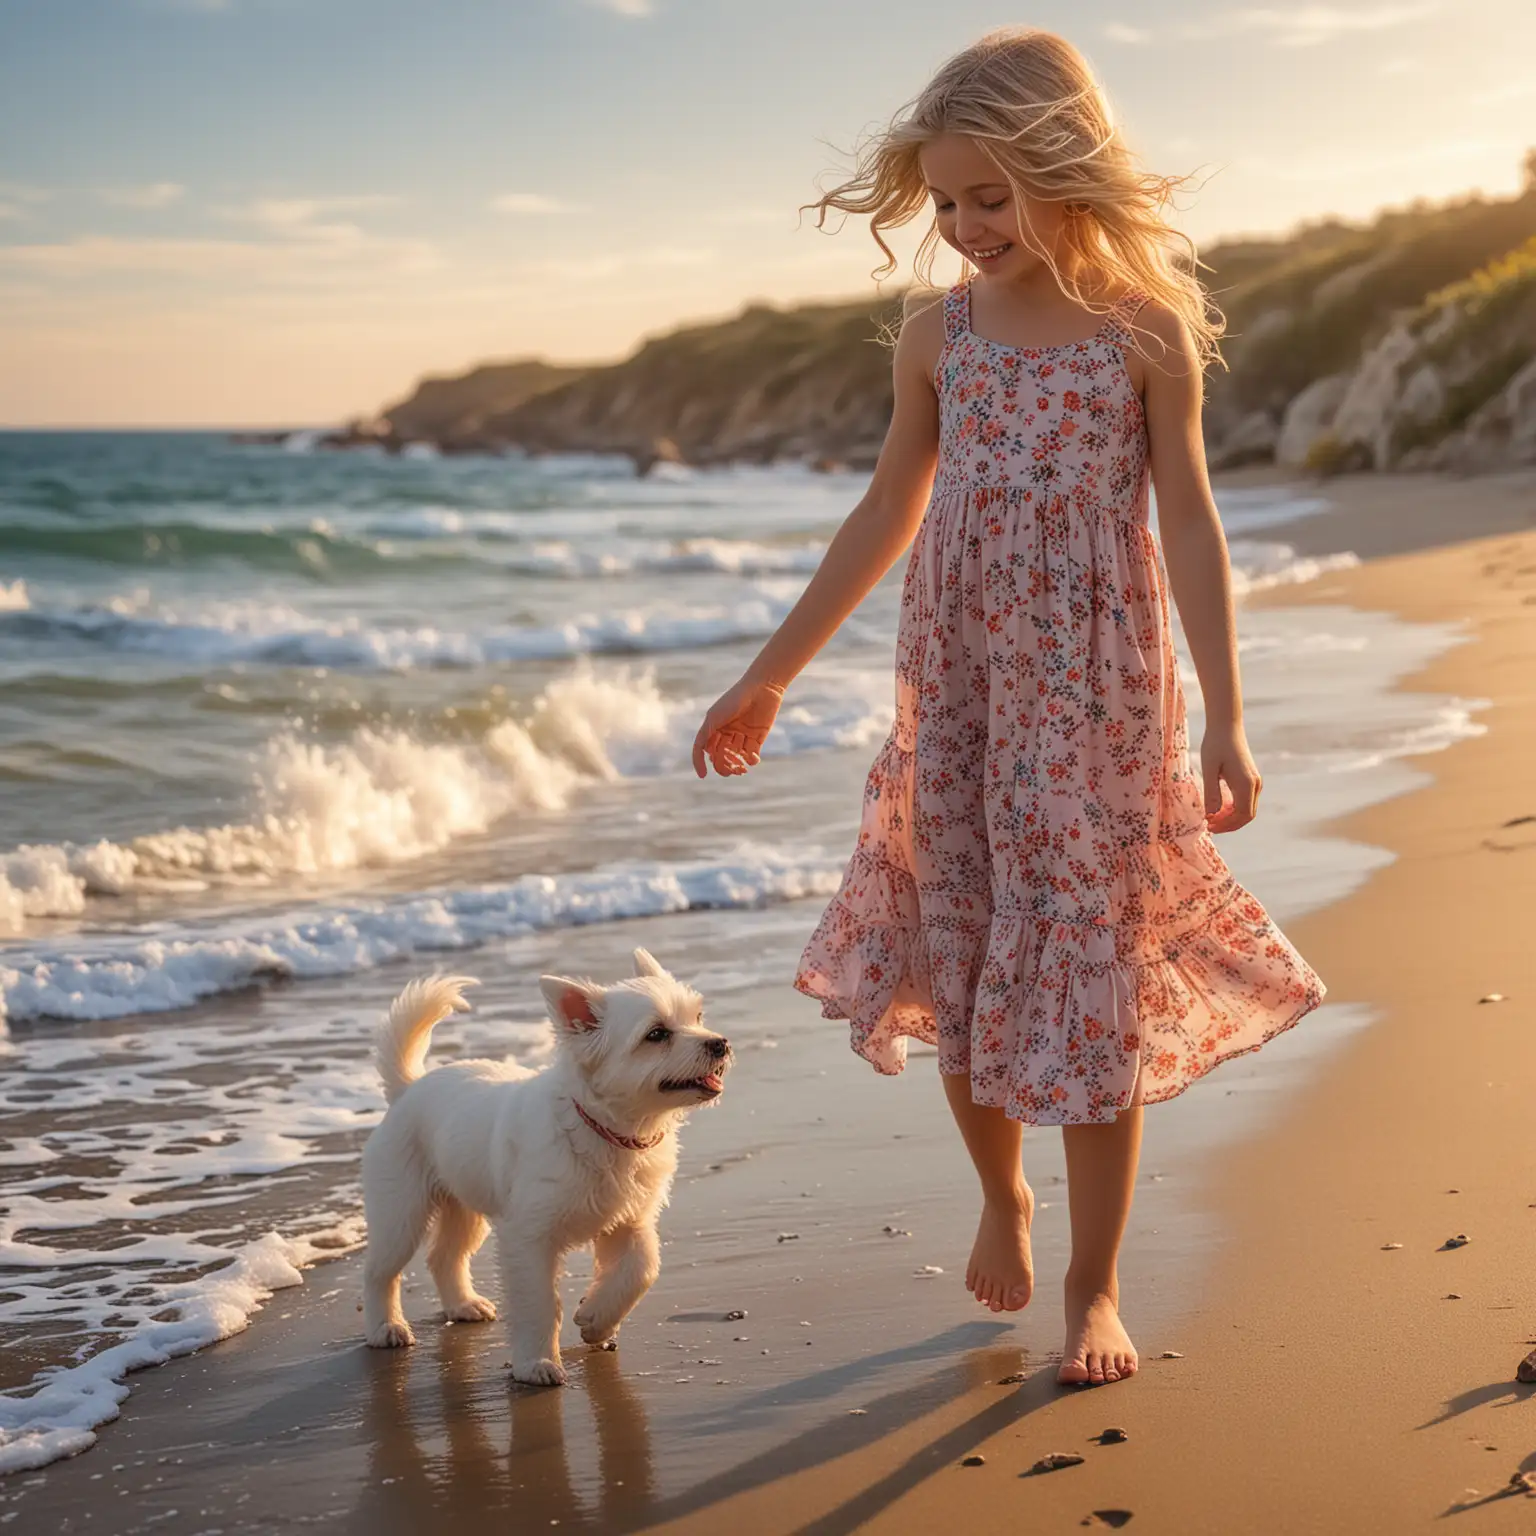 Teen-Girl-with-Puppy-on-Sandy-Beach-at-Sunset